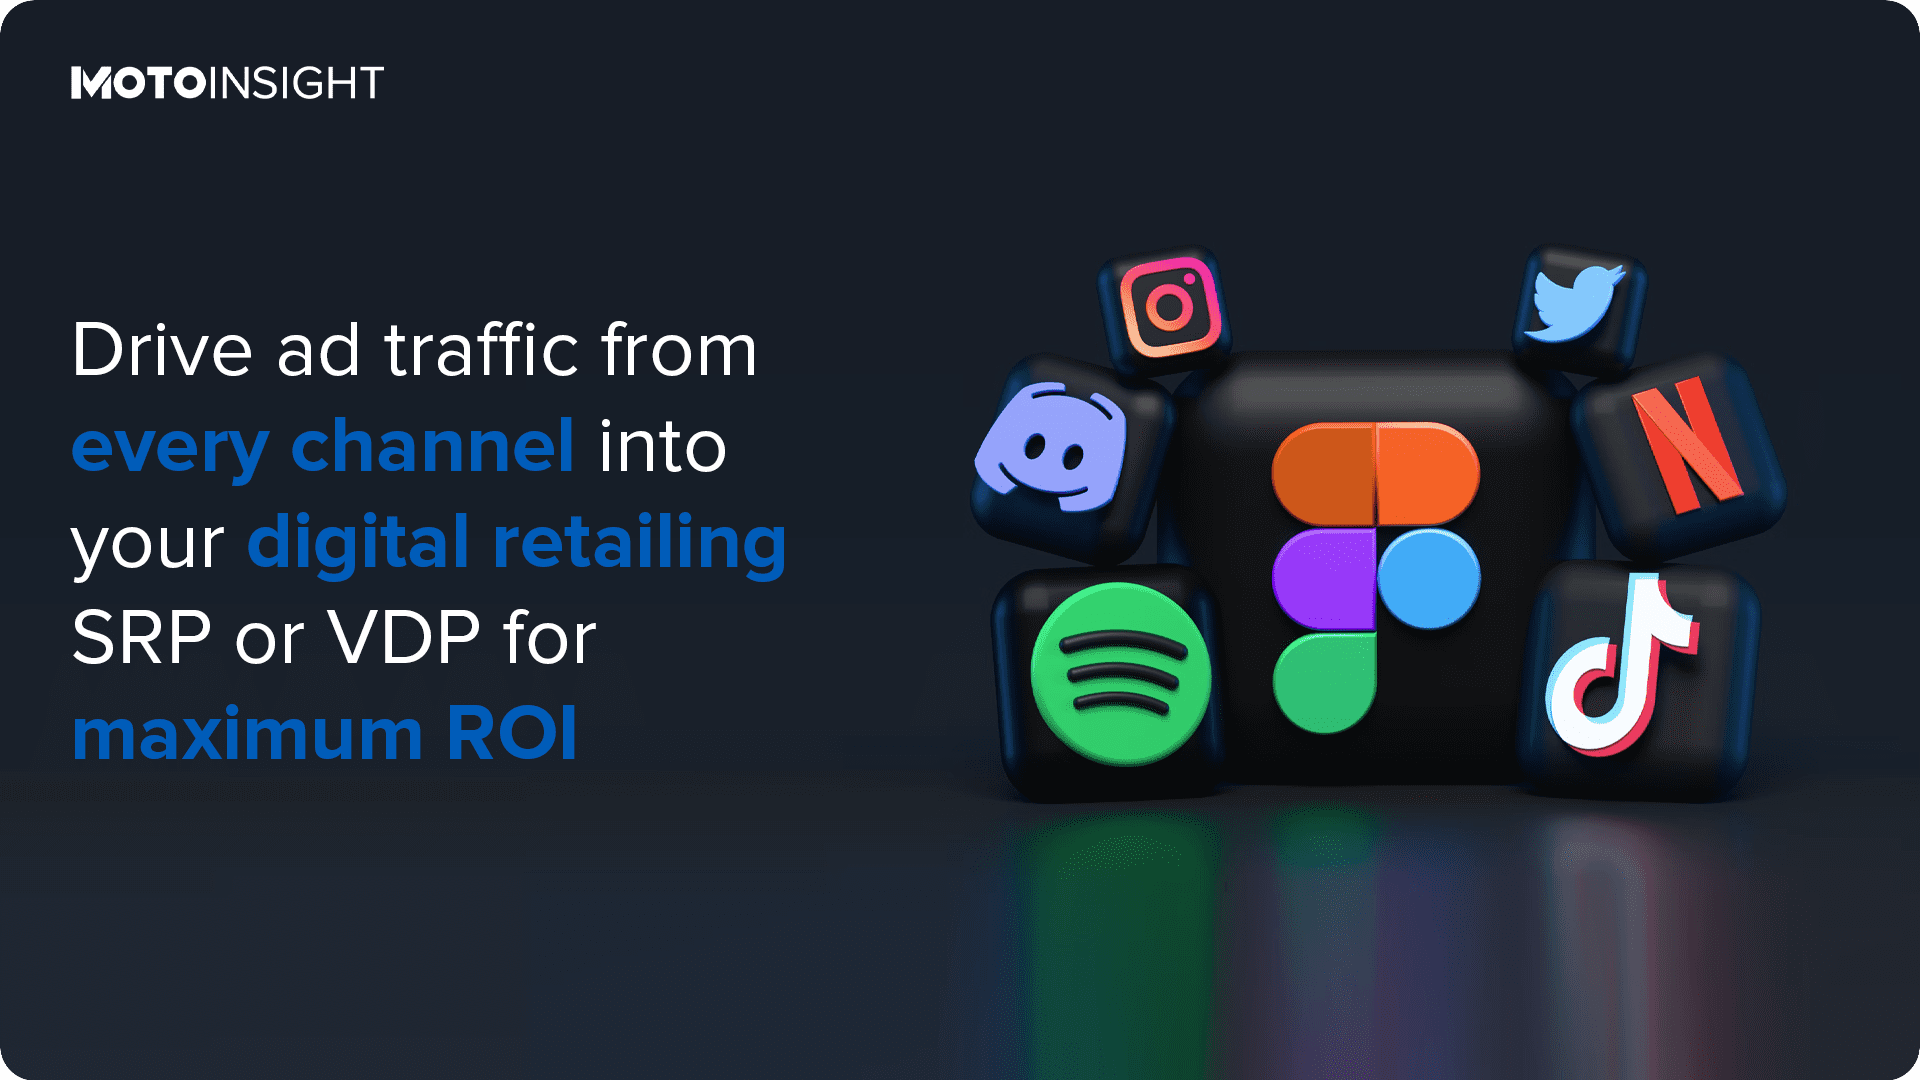 Drive ad traffic from every channel into your digital retailing SRP or VDP for maximum ROI